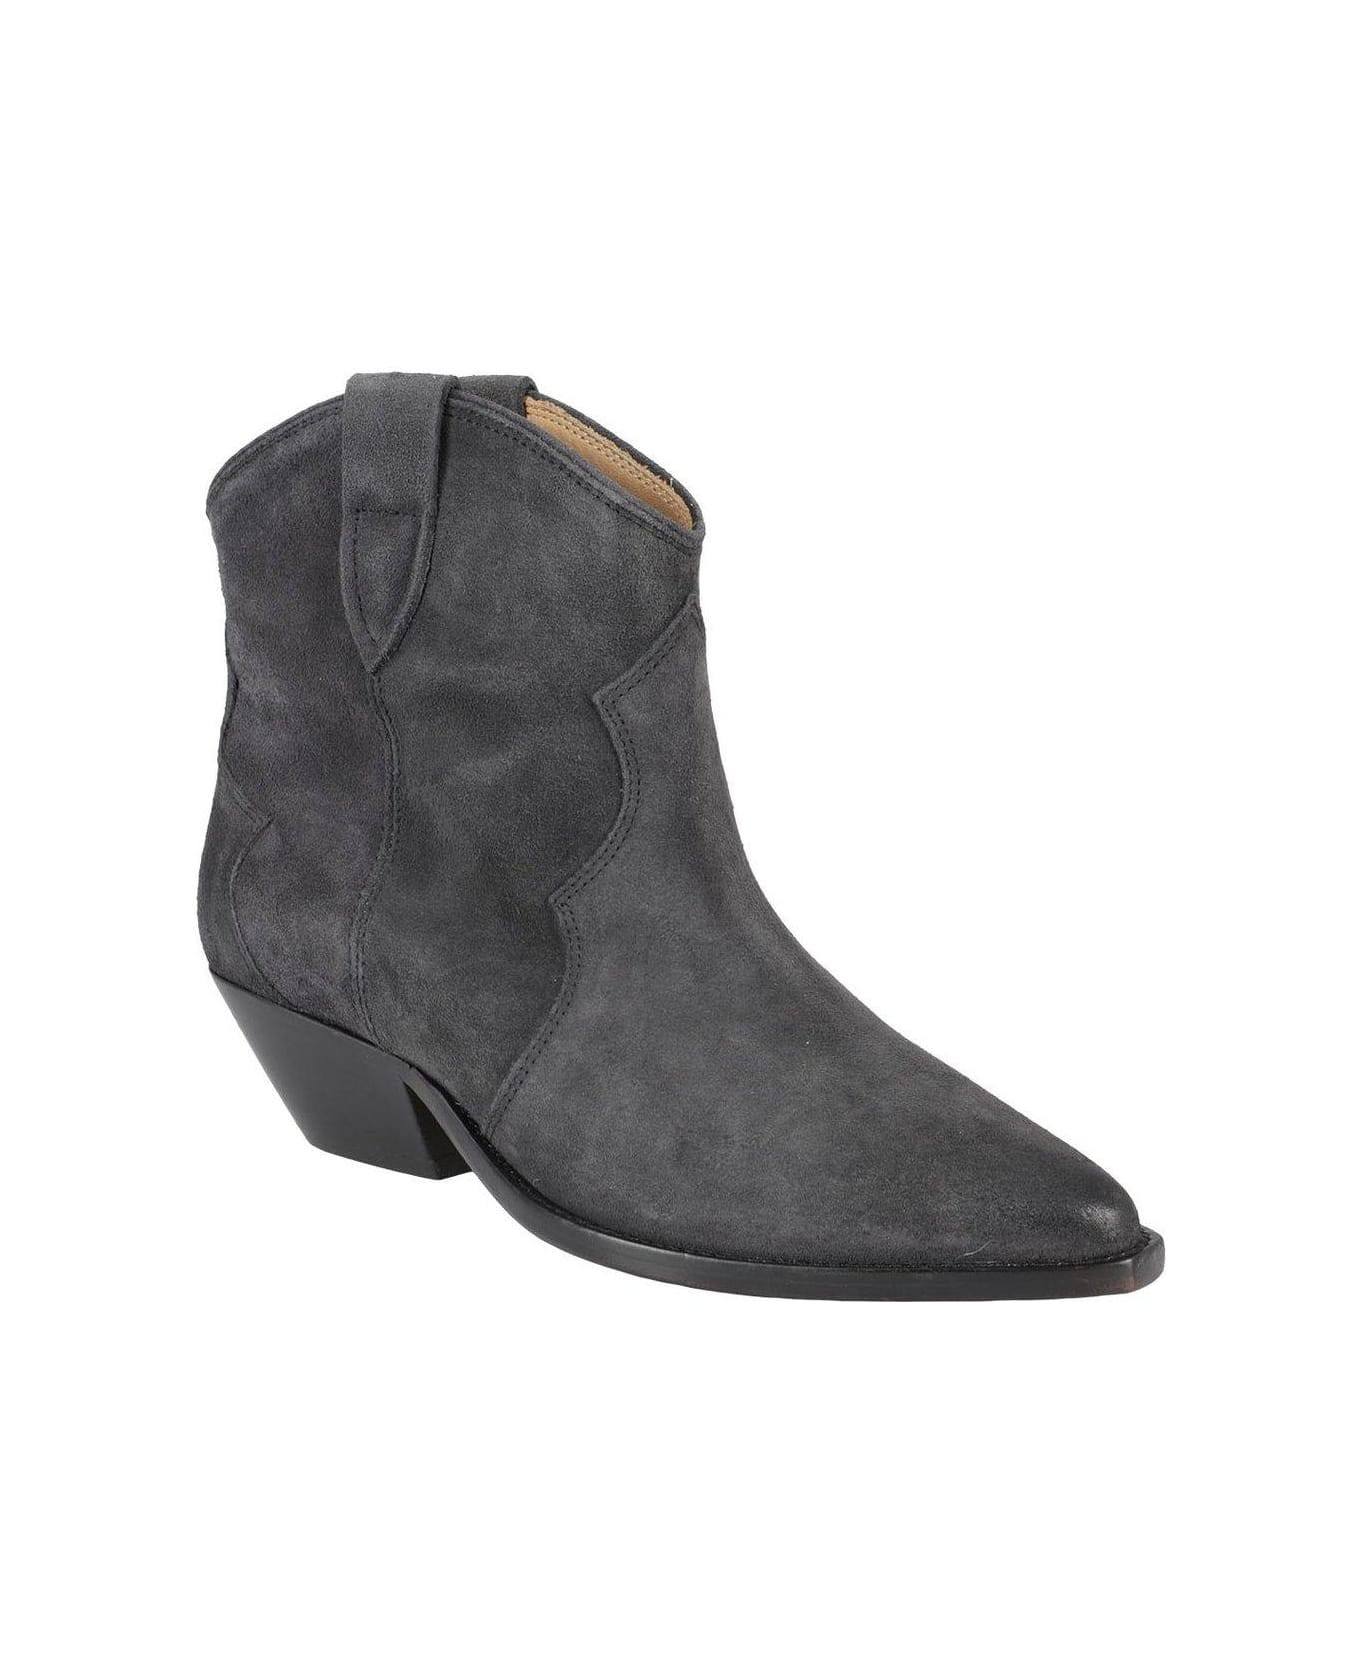 Isabel Marant Pointed Toe Ankle Boots - Black ブーツ